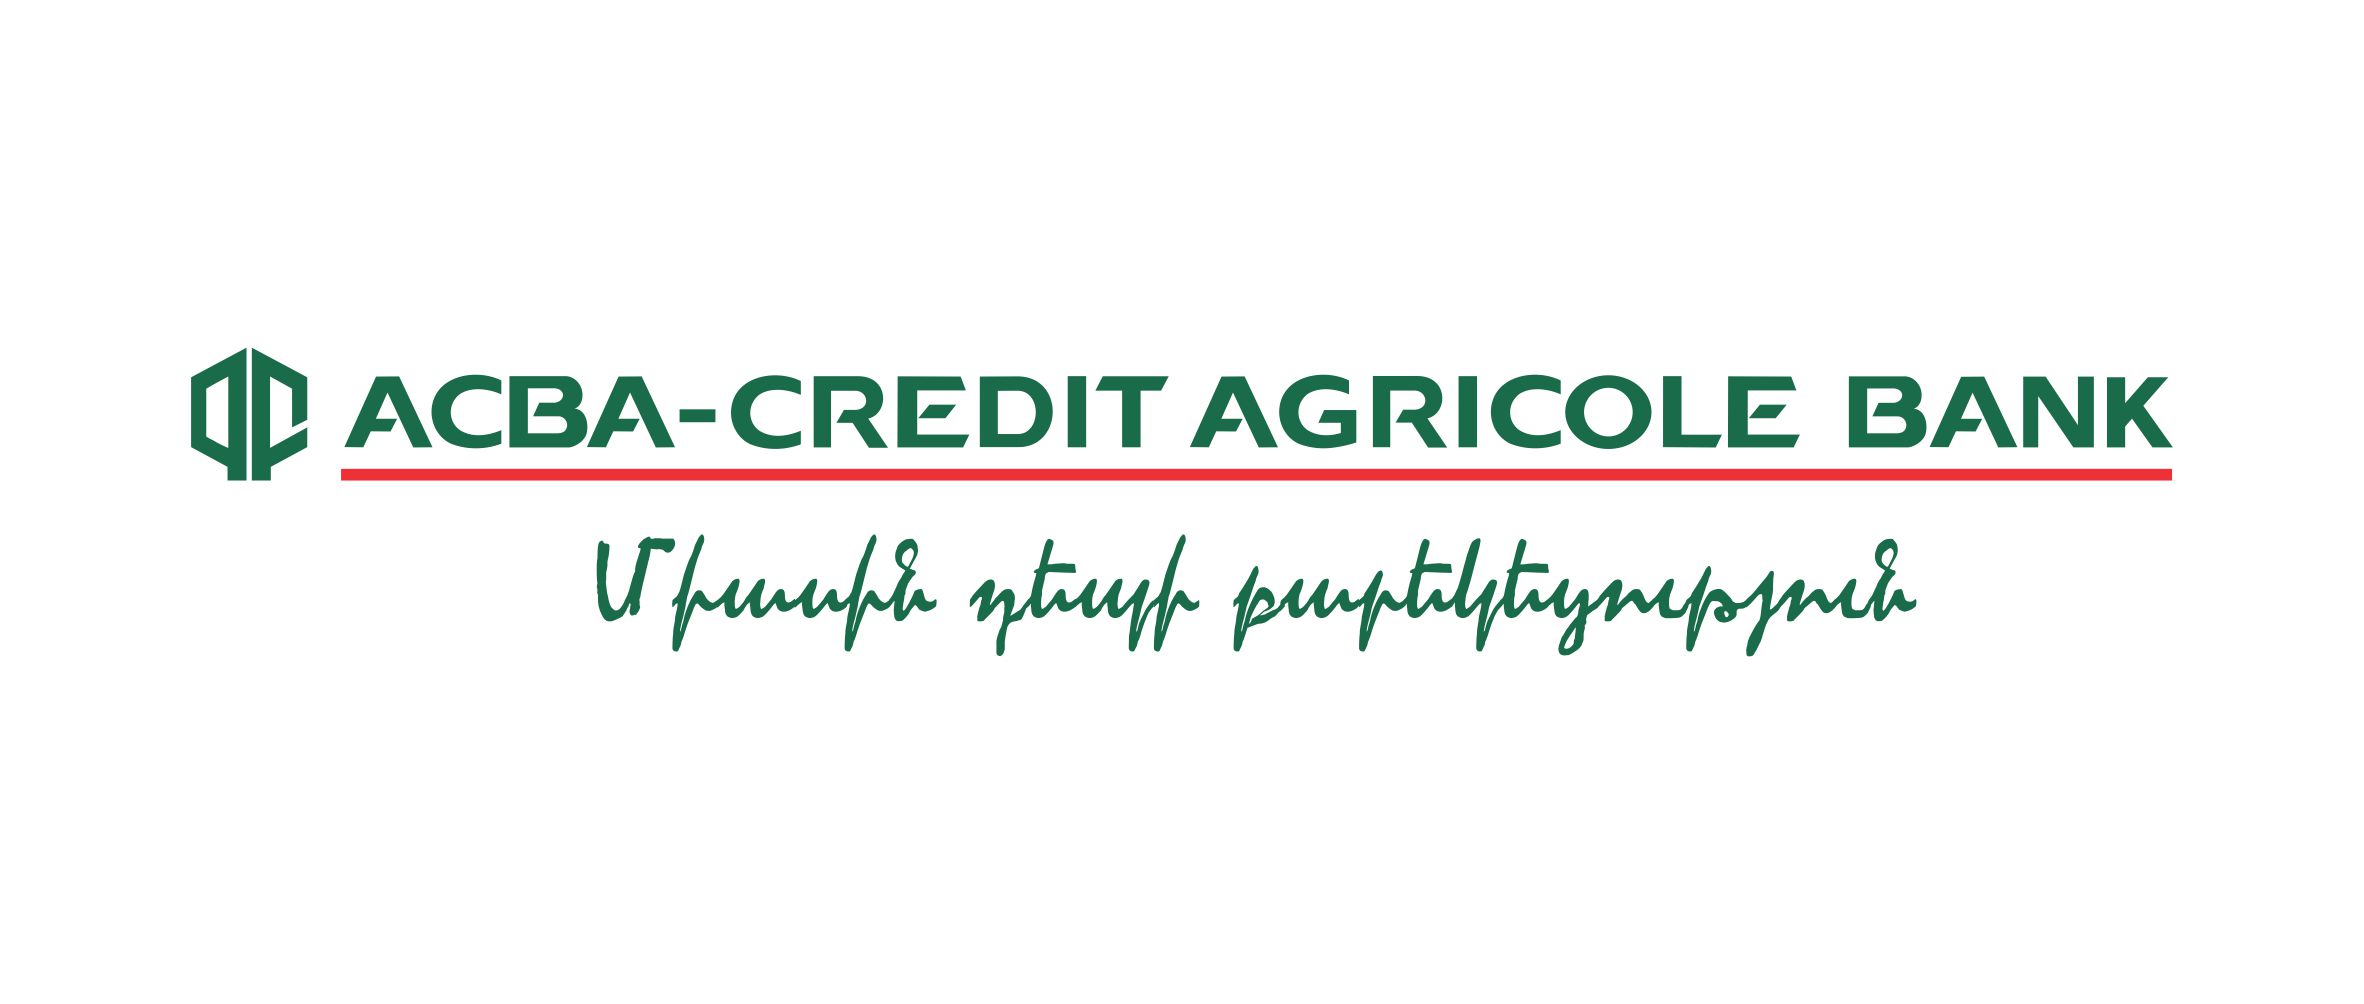 ACBA-Credit Agricole Bank to enter Armenian corporate bonds market on August 18